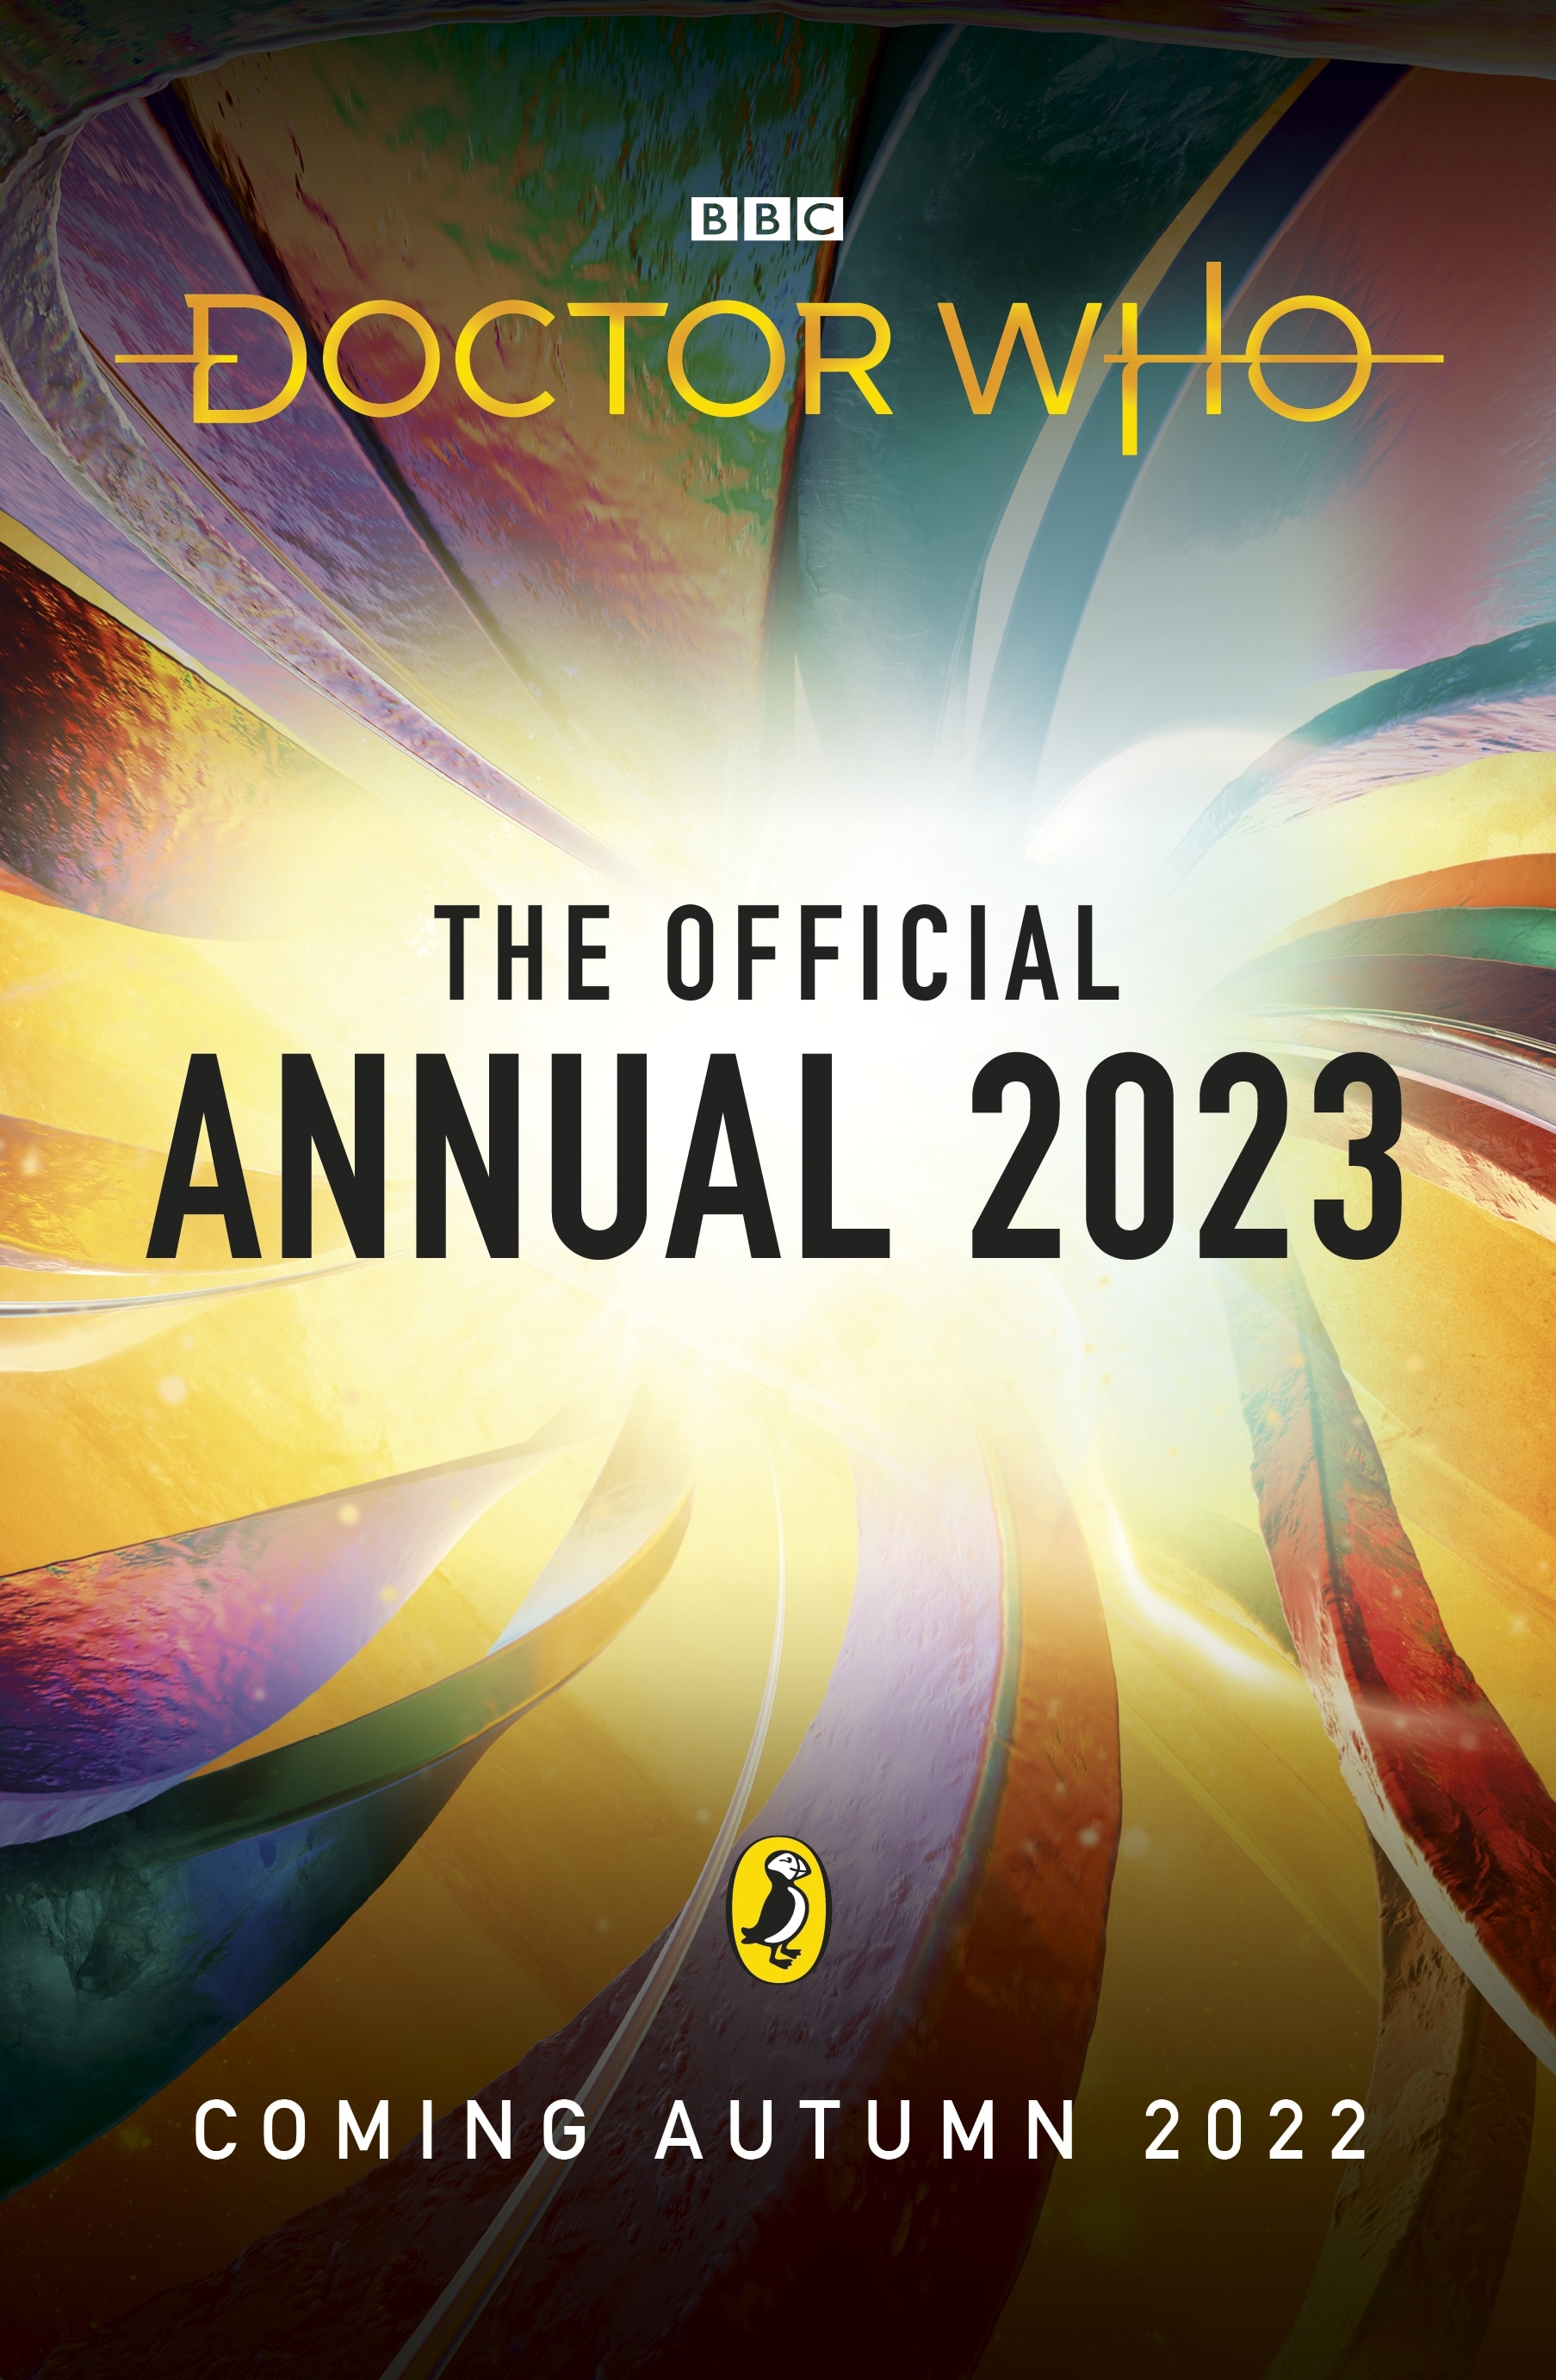 Book “Doctor Who Annual 2023” by Doctor Who — September 1, 2022